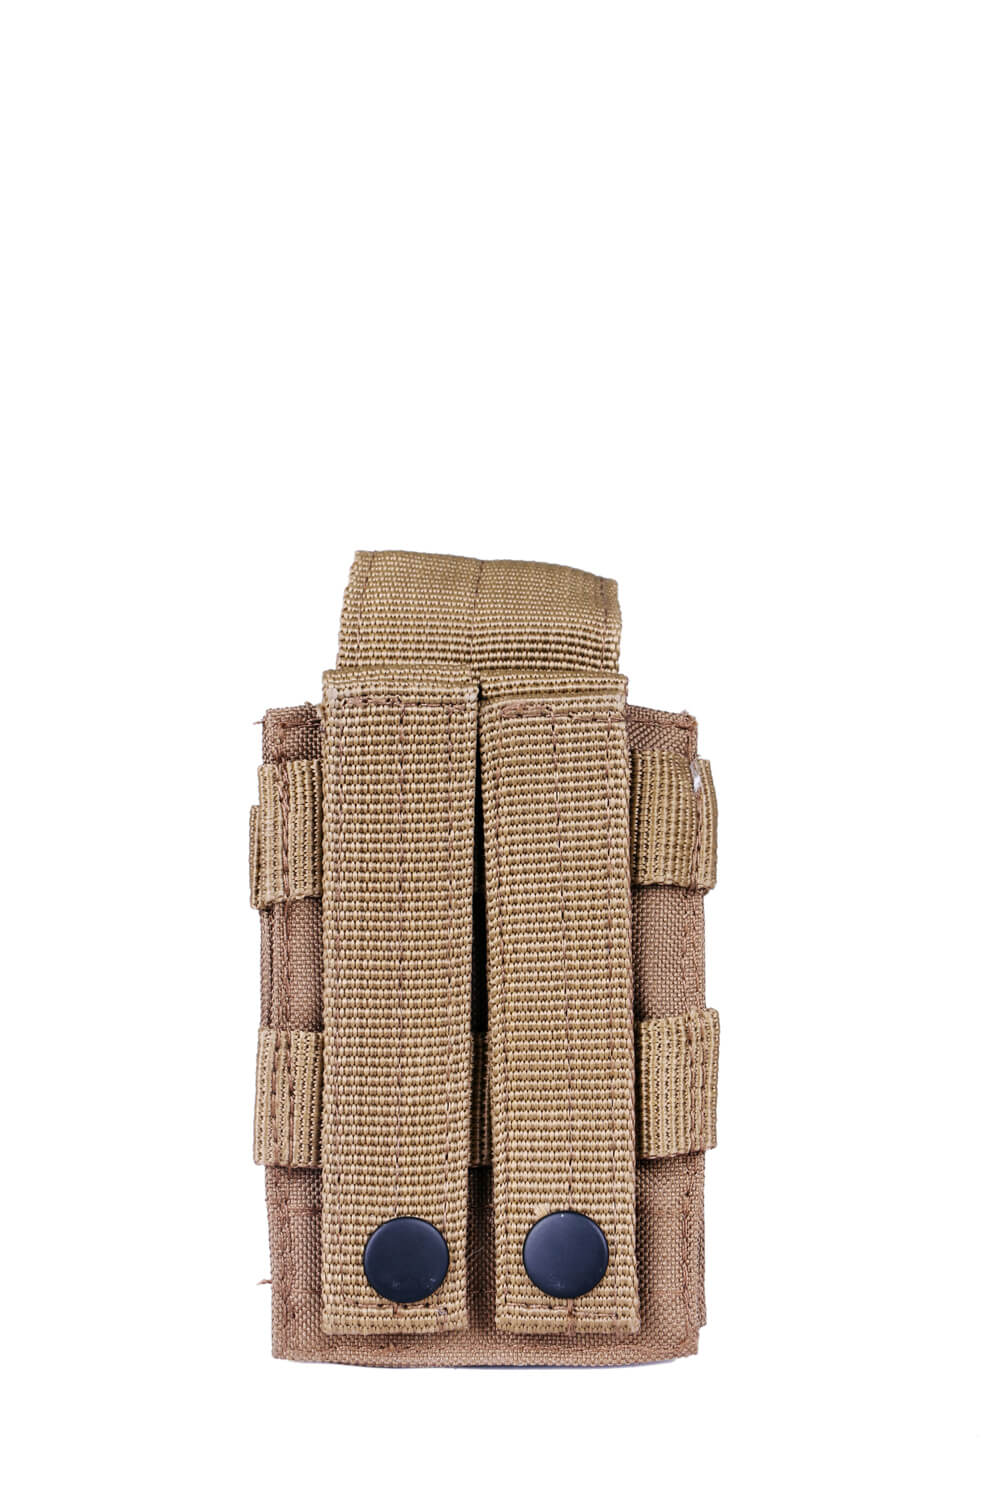 Hand Grenade Molle Pouch 